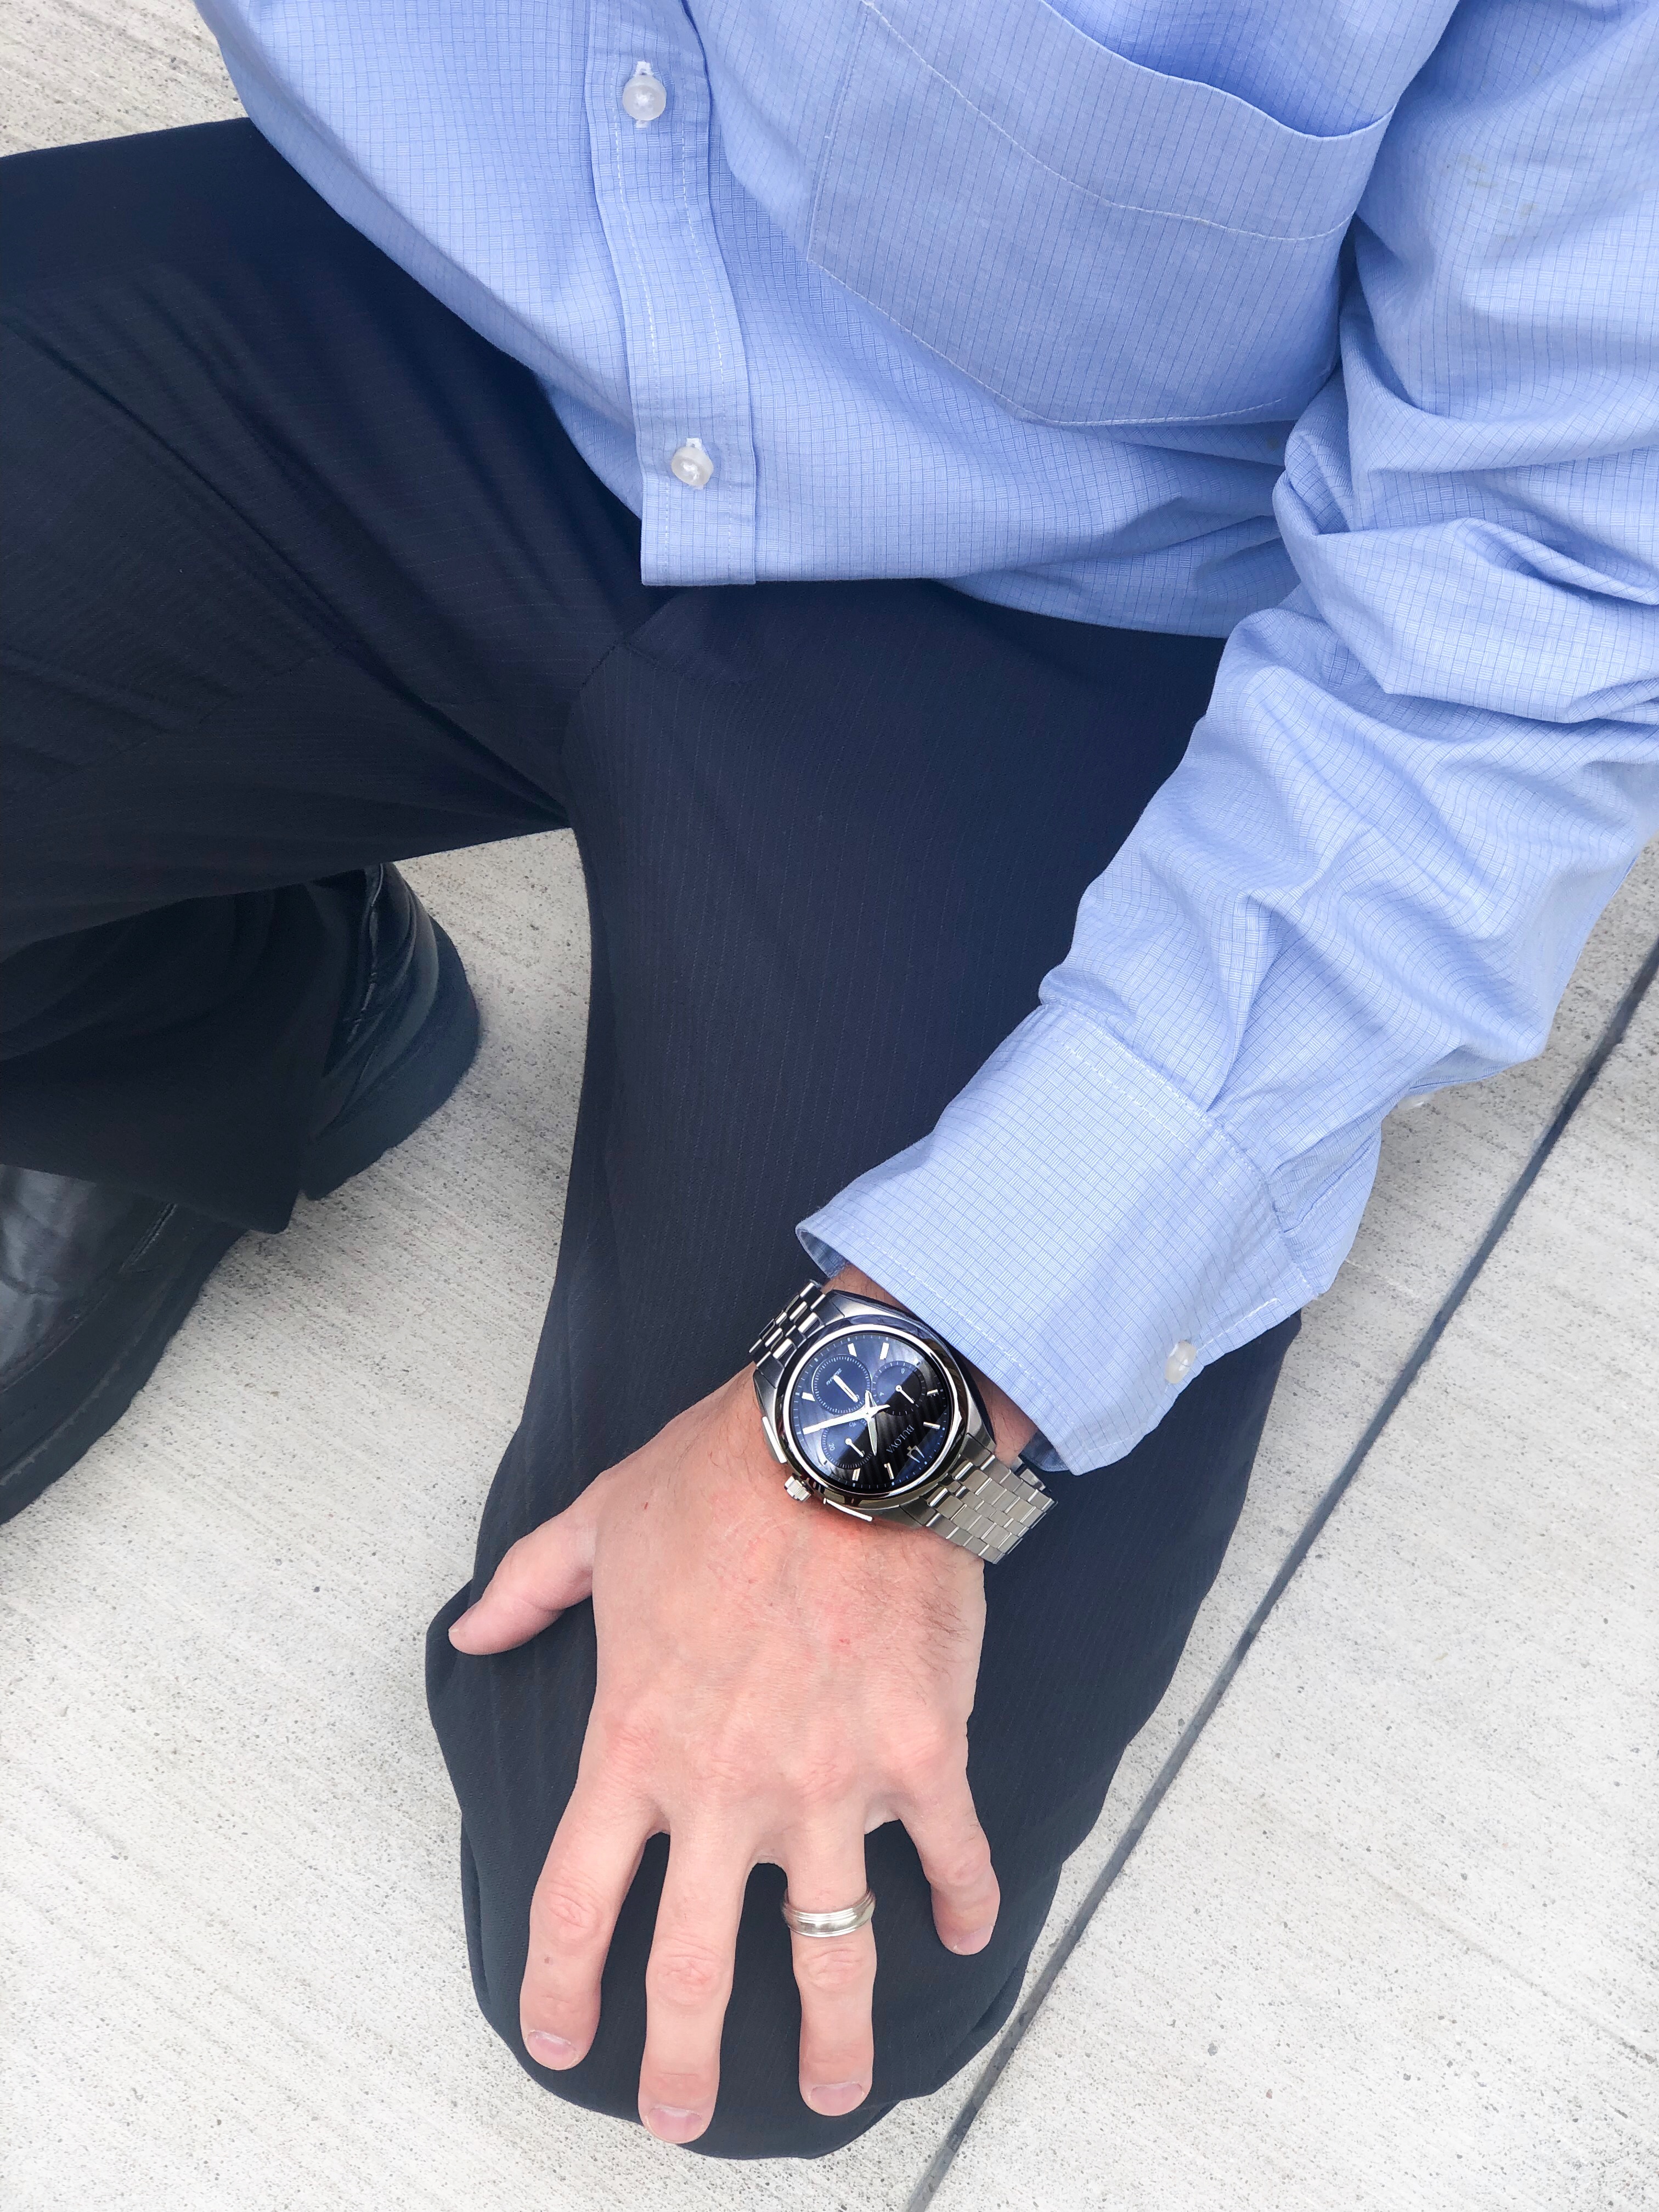 Men's Curv Chronograph Watch by Bulova on Livin' Life with Style 